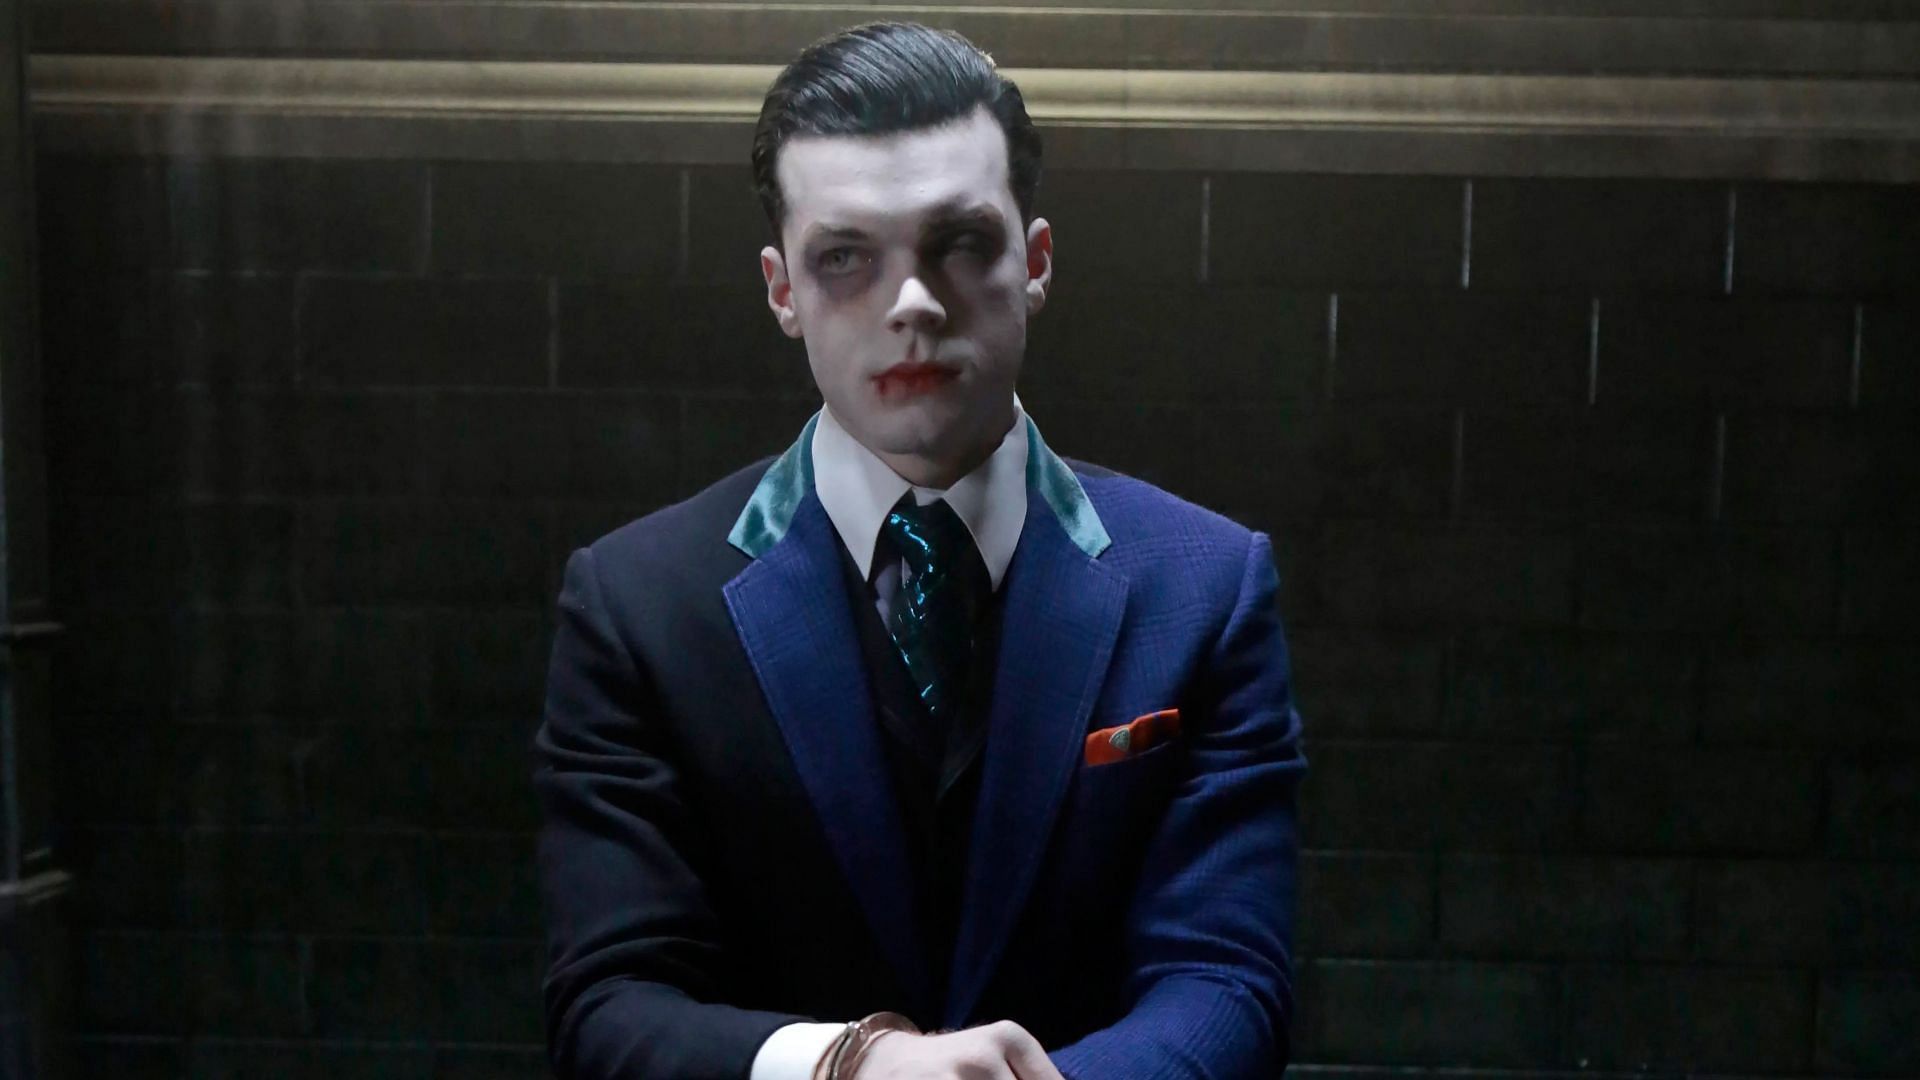 Cameron Monaghan portrayed two versions of the Joker actor on the Fox series Gotham. (Image Via DC)